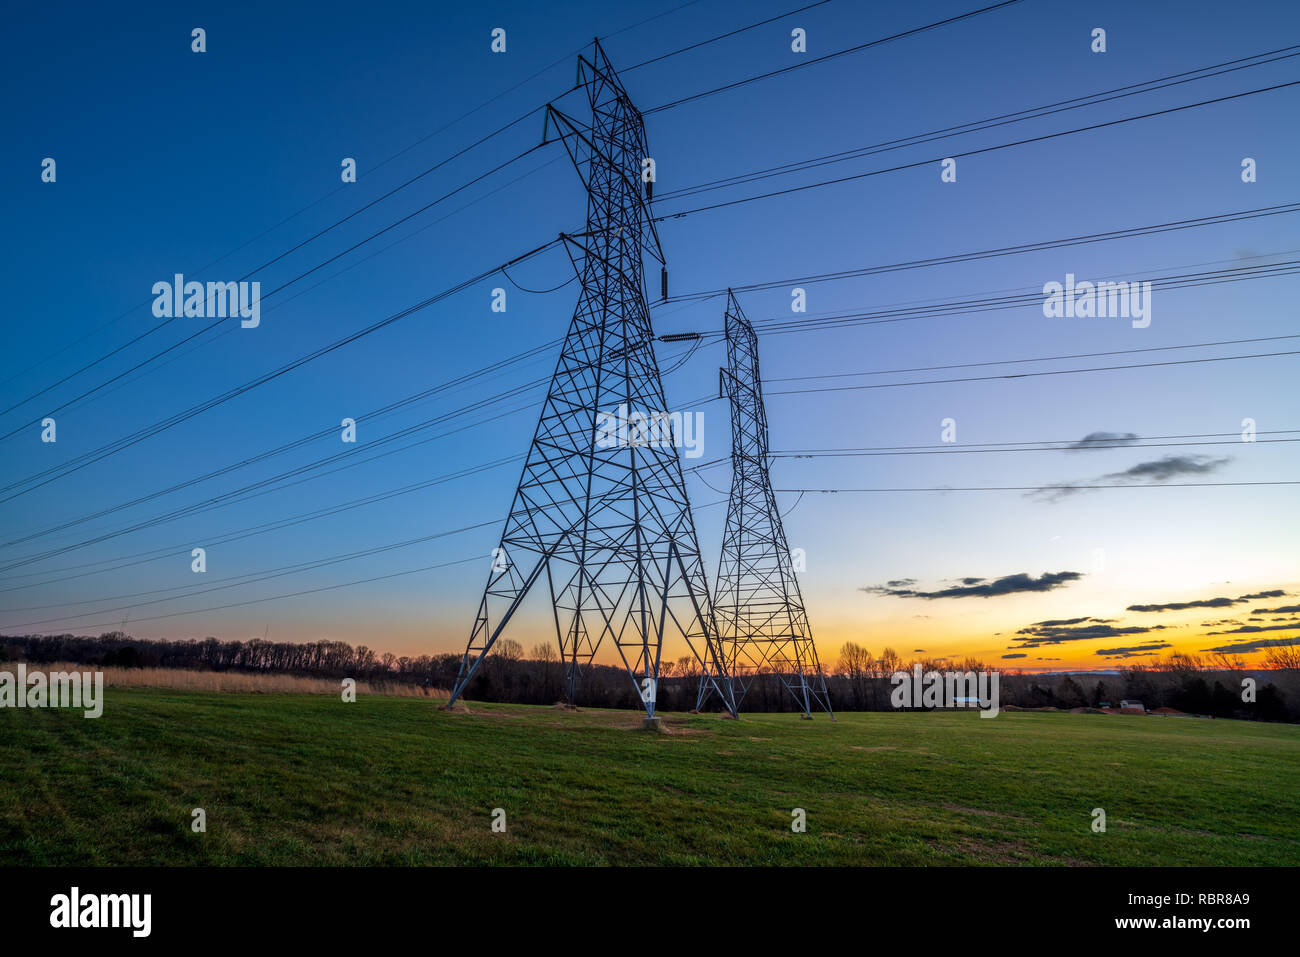 Electricity Distribution Towers and Wires at Dusk Stock Photo